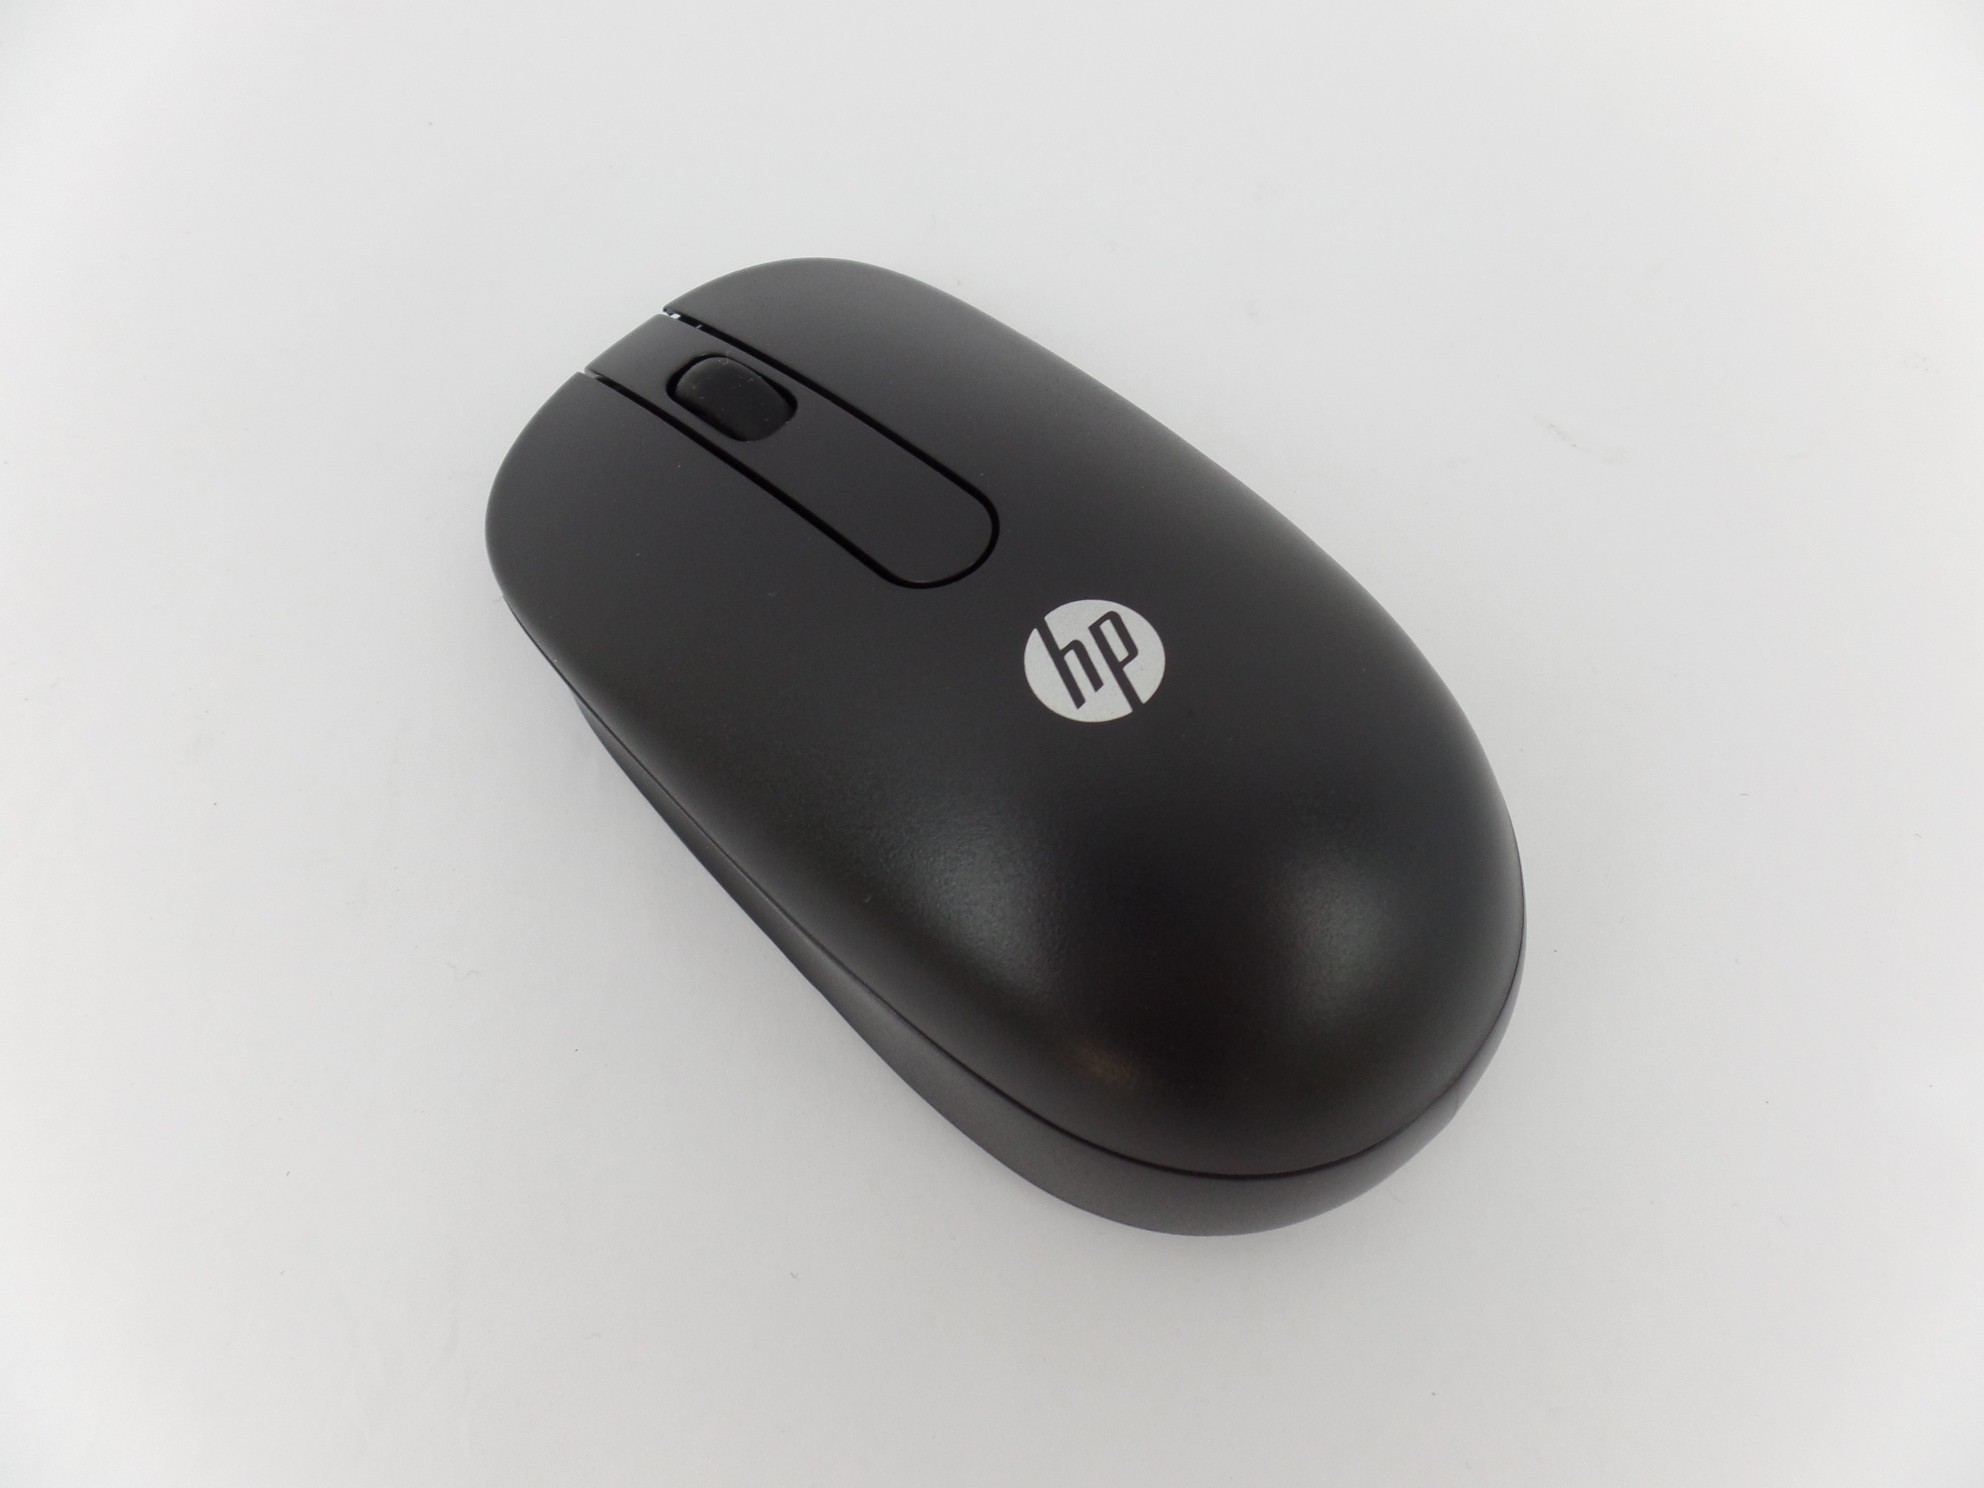 Read: NO USB Receiver HP Wireless Mouse 672653-001